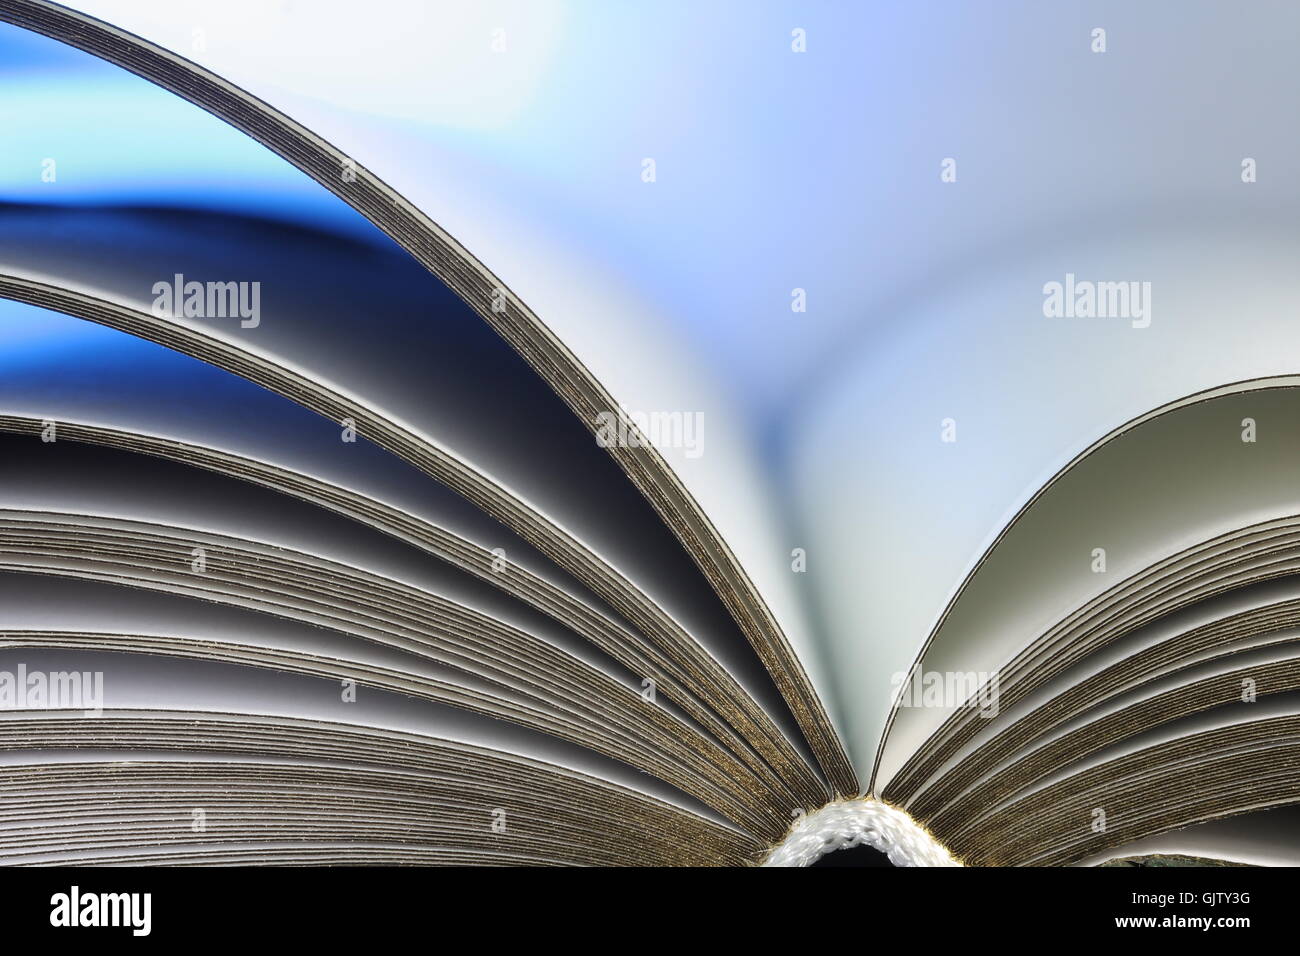 golden book pages pitched Stock Photo